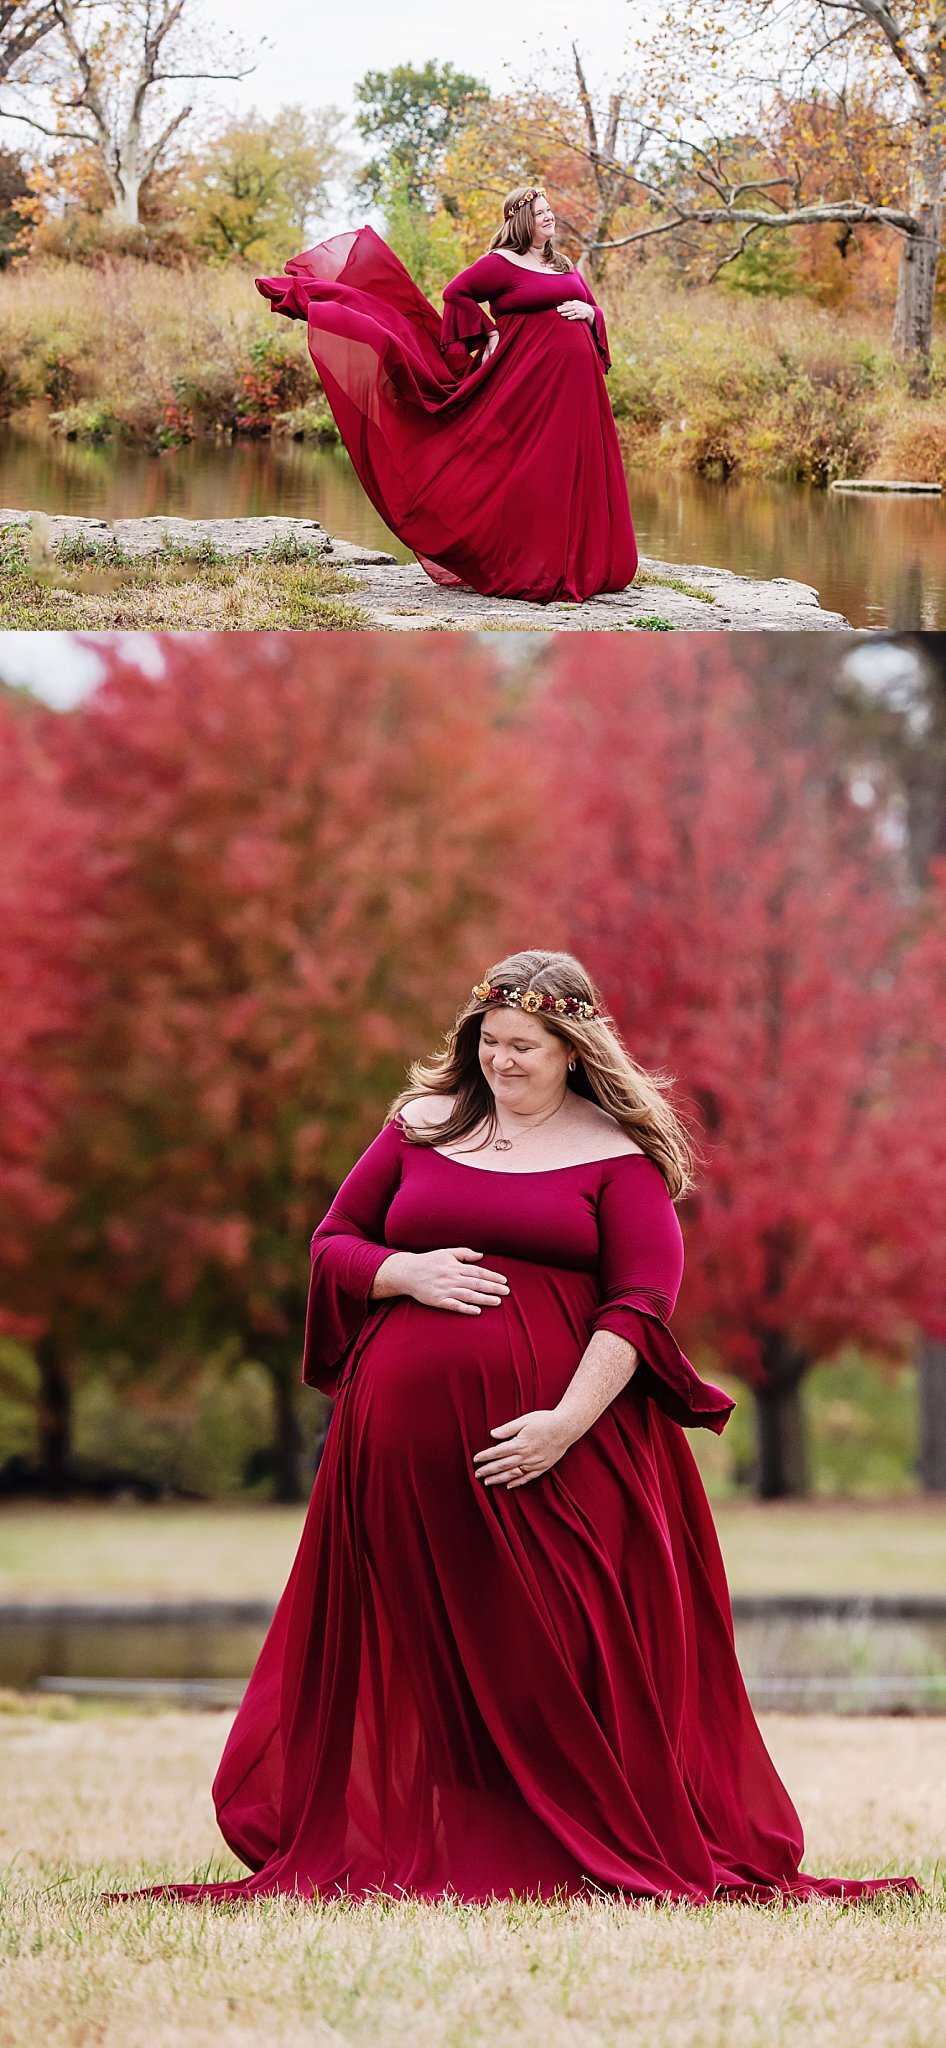 st-louis-maternity-photographer-fall-session-leaves-dress-outdoor.jpg